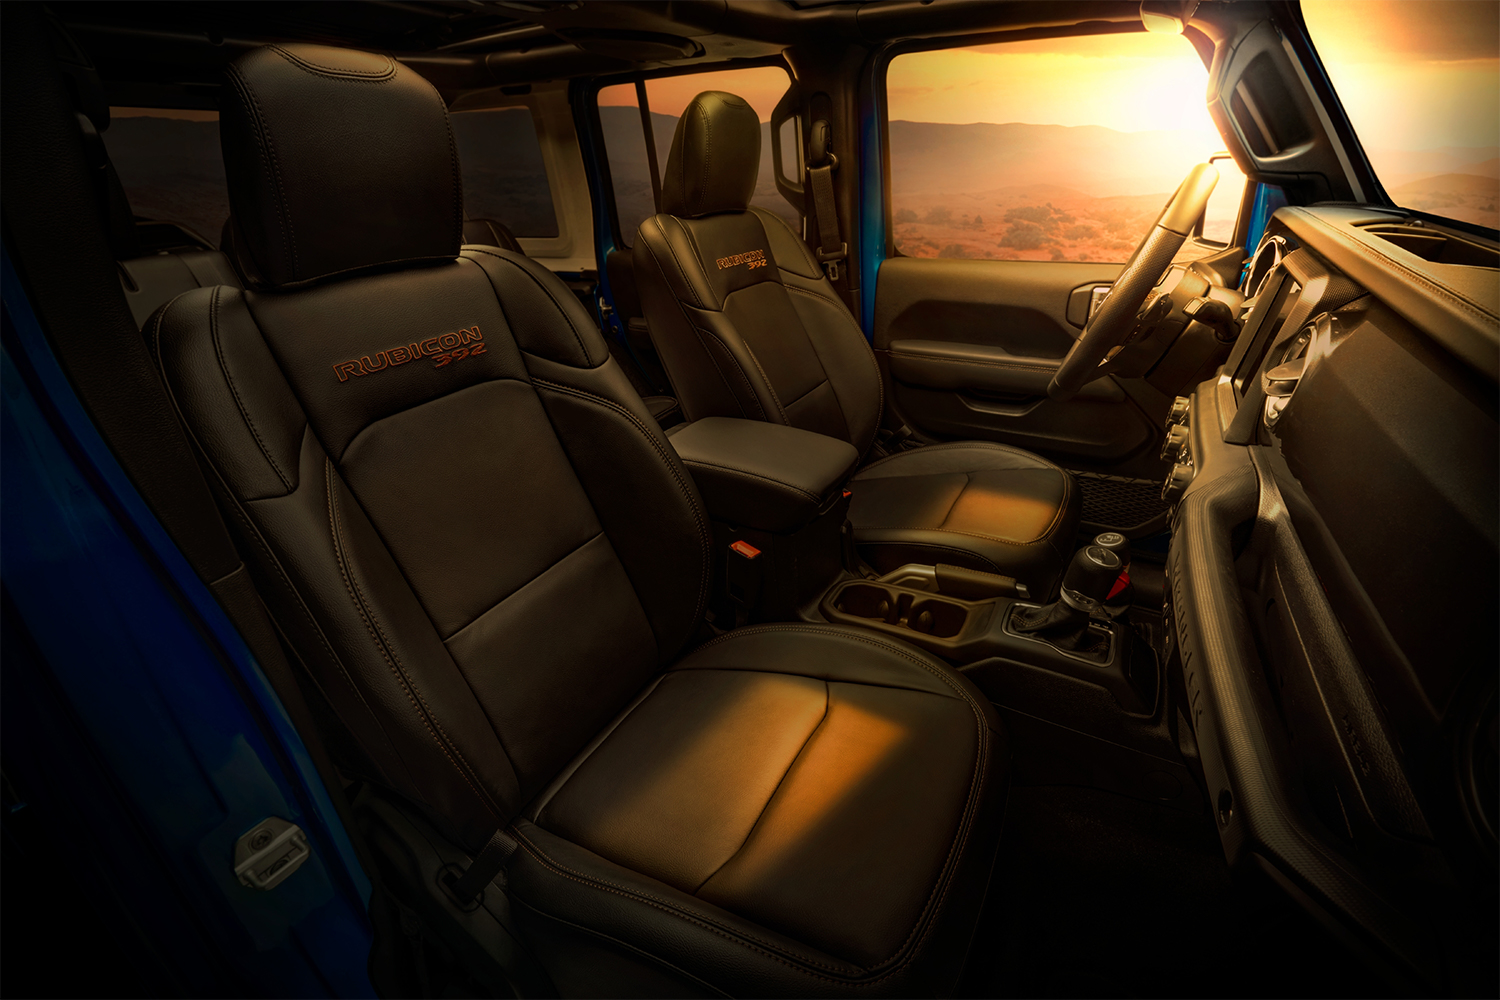 The 2022 Jeep Wrangler Rubicon 392 with two front seats, an off-road SUV with a V8 engine